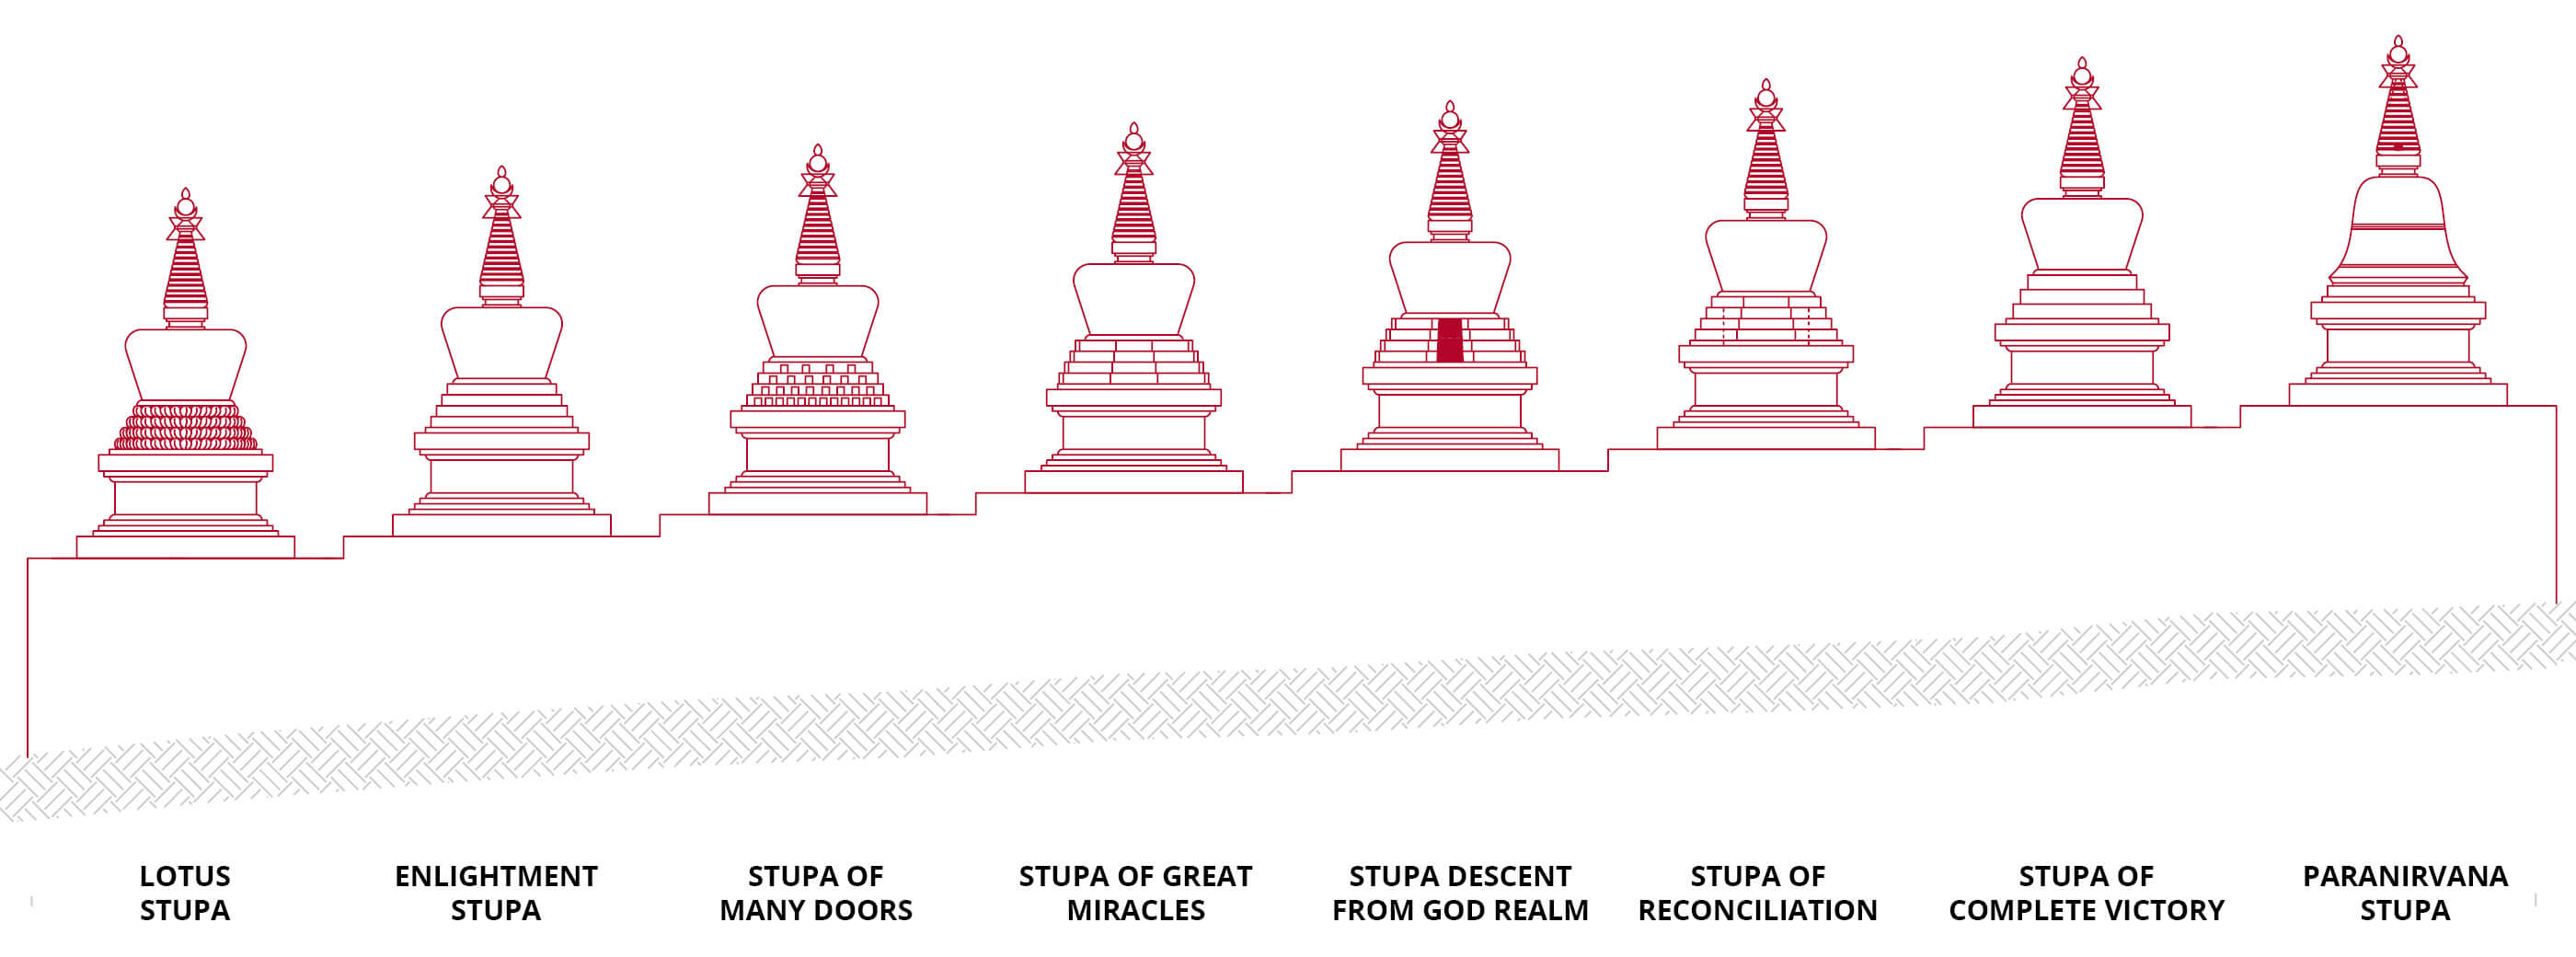 All 8 non-tantric Stupas how they will be build in KBL